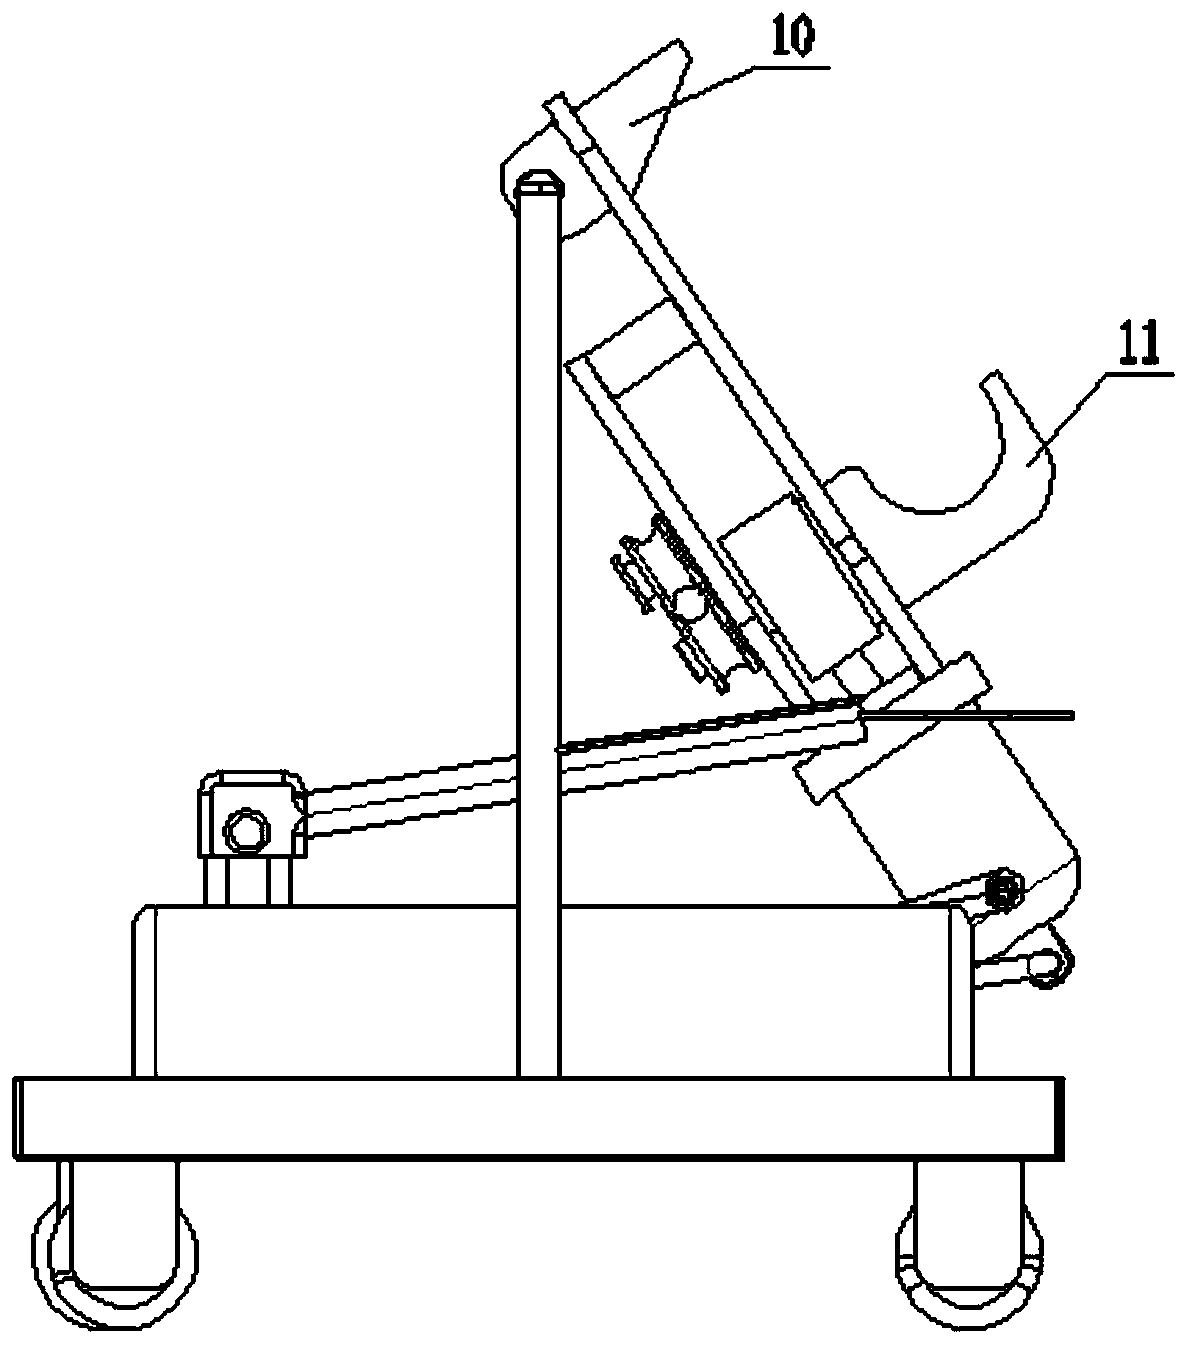 Movable steel strand bending and clamping combination tool